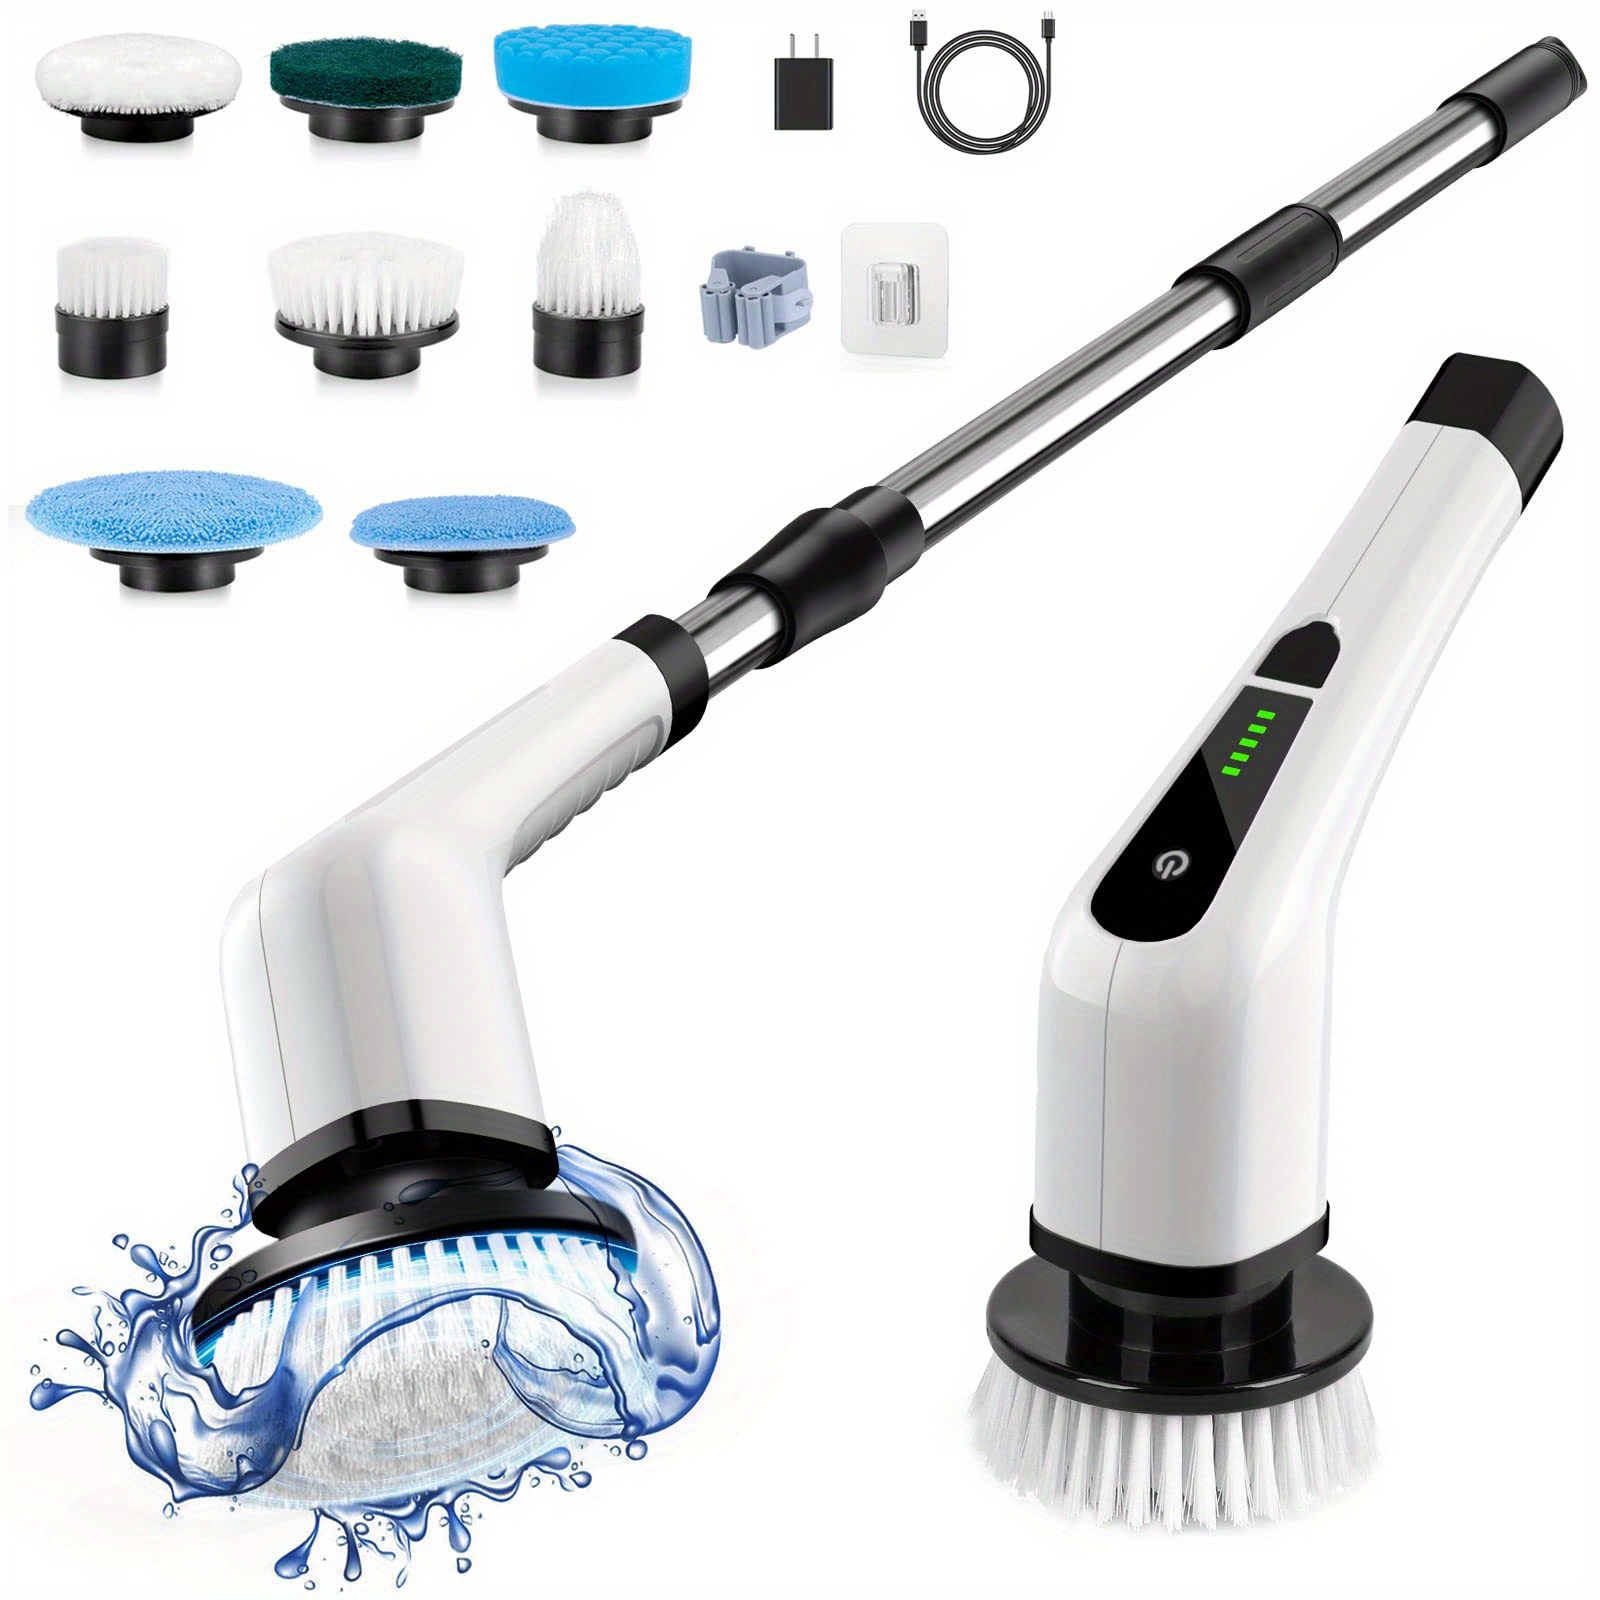 Electric Cleaning Brush, Waterproof Electric Spin Scrubber